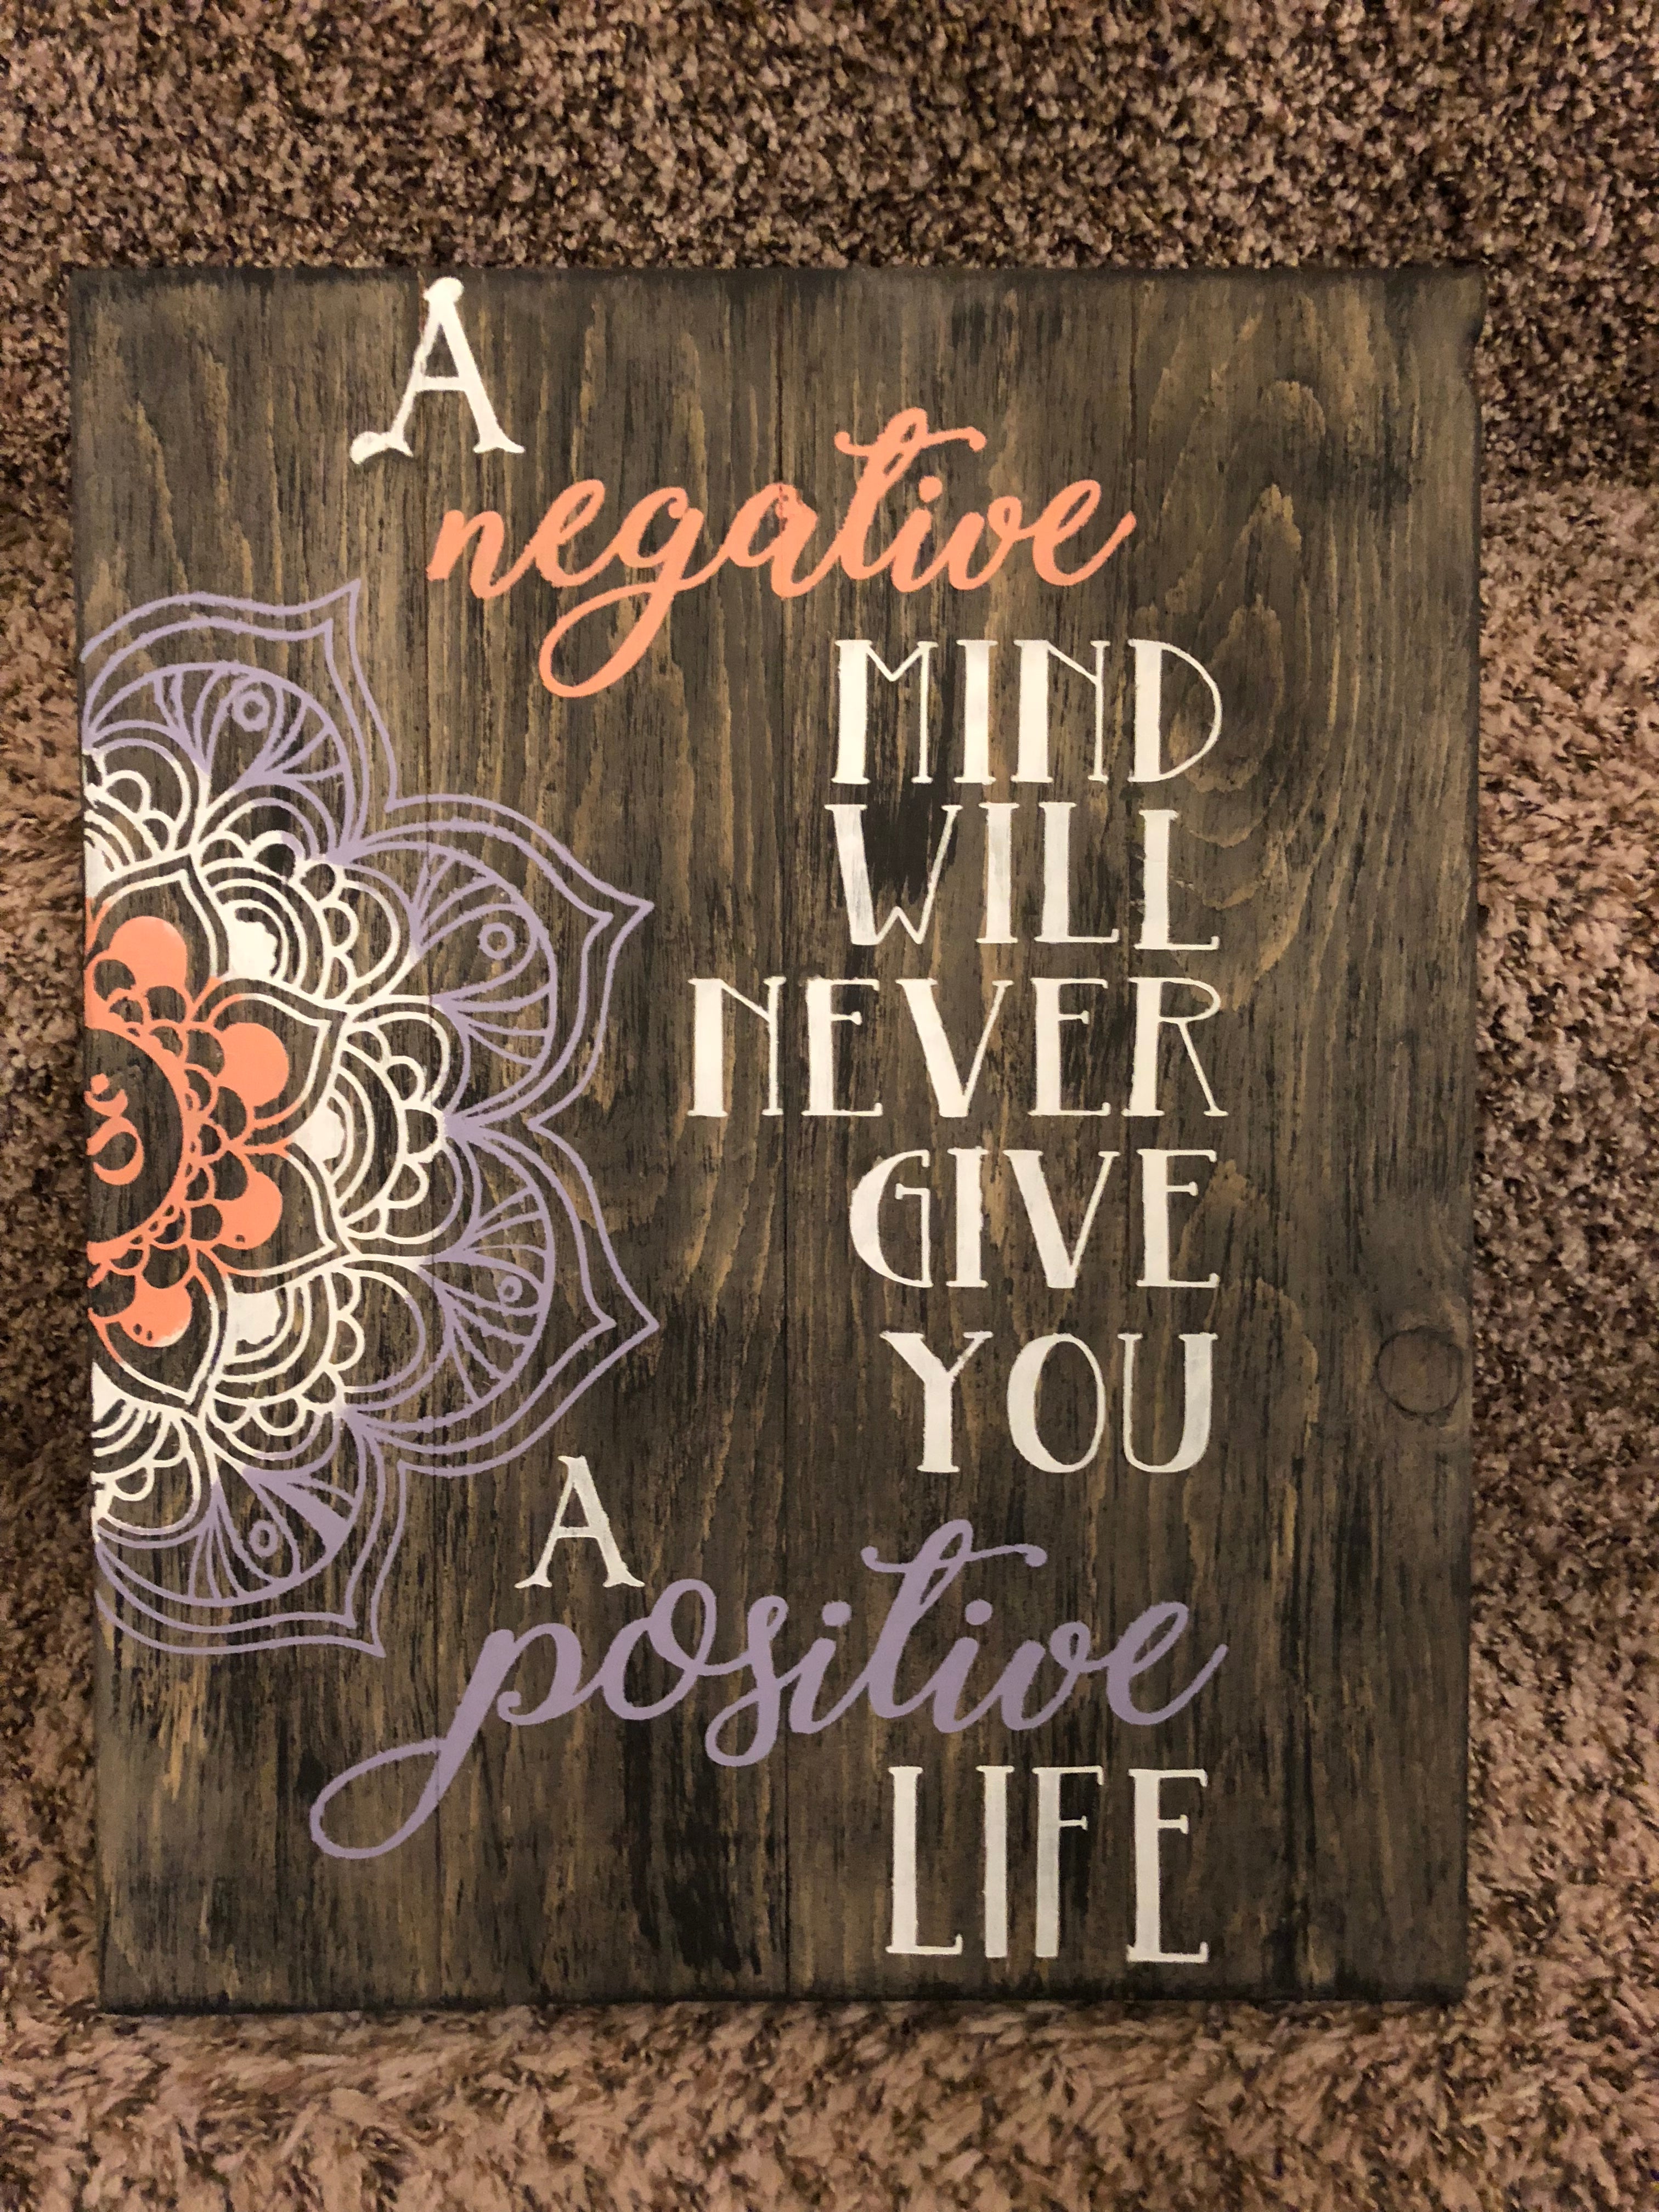 A Negative mind will never give you a positive life